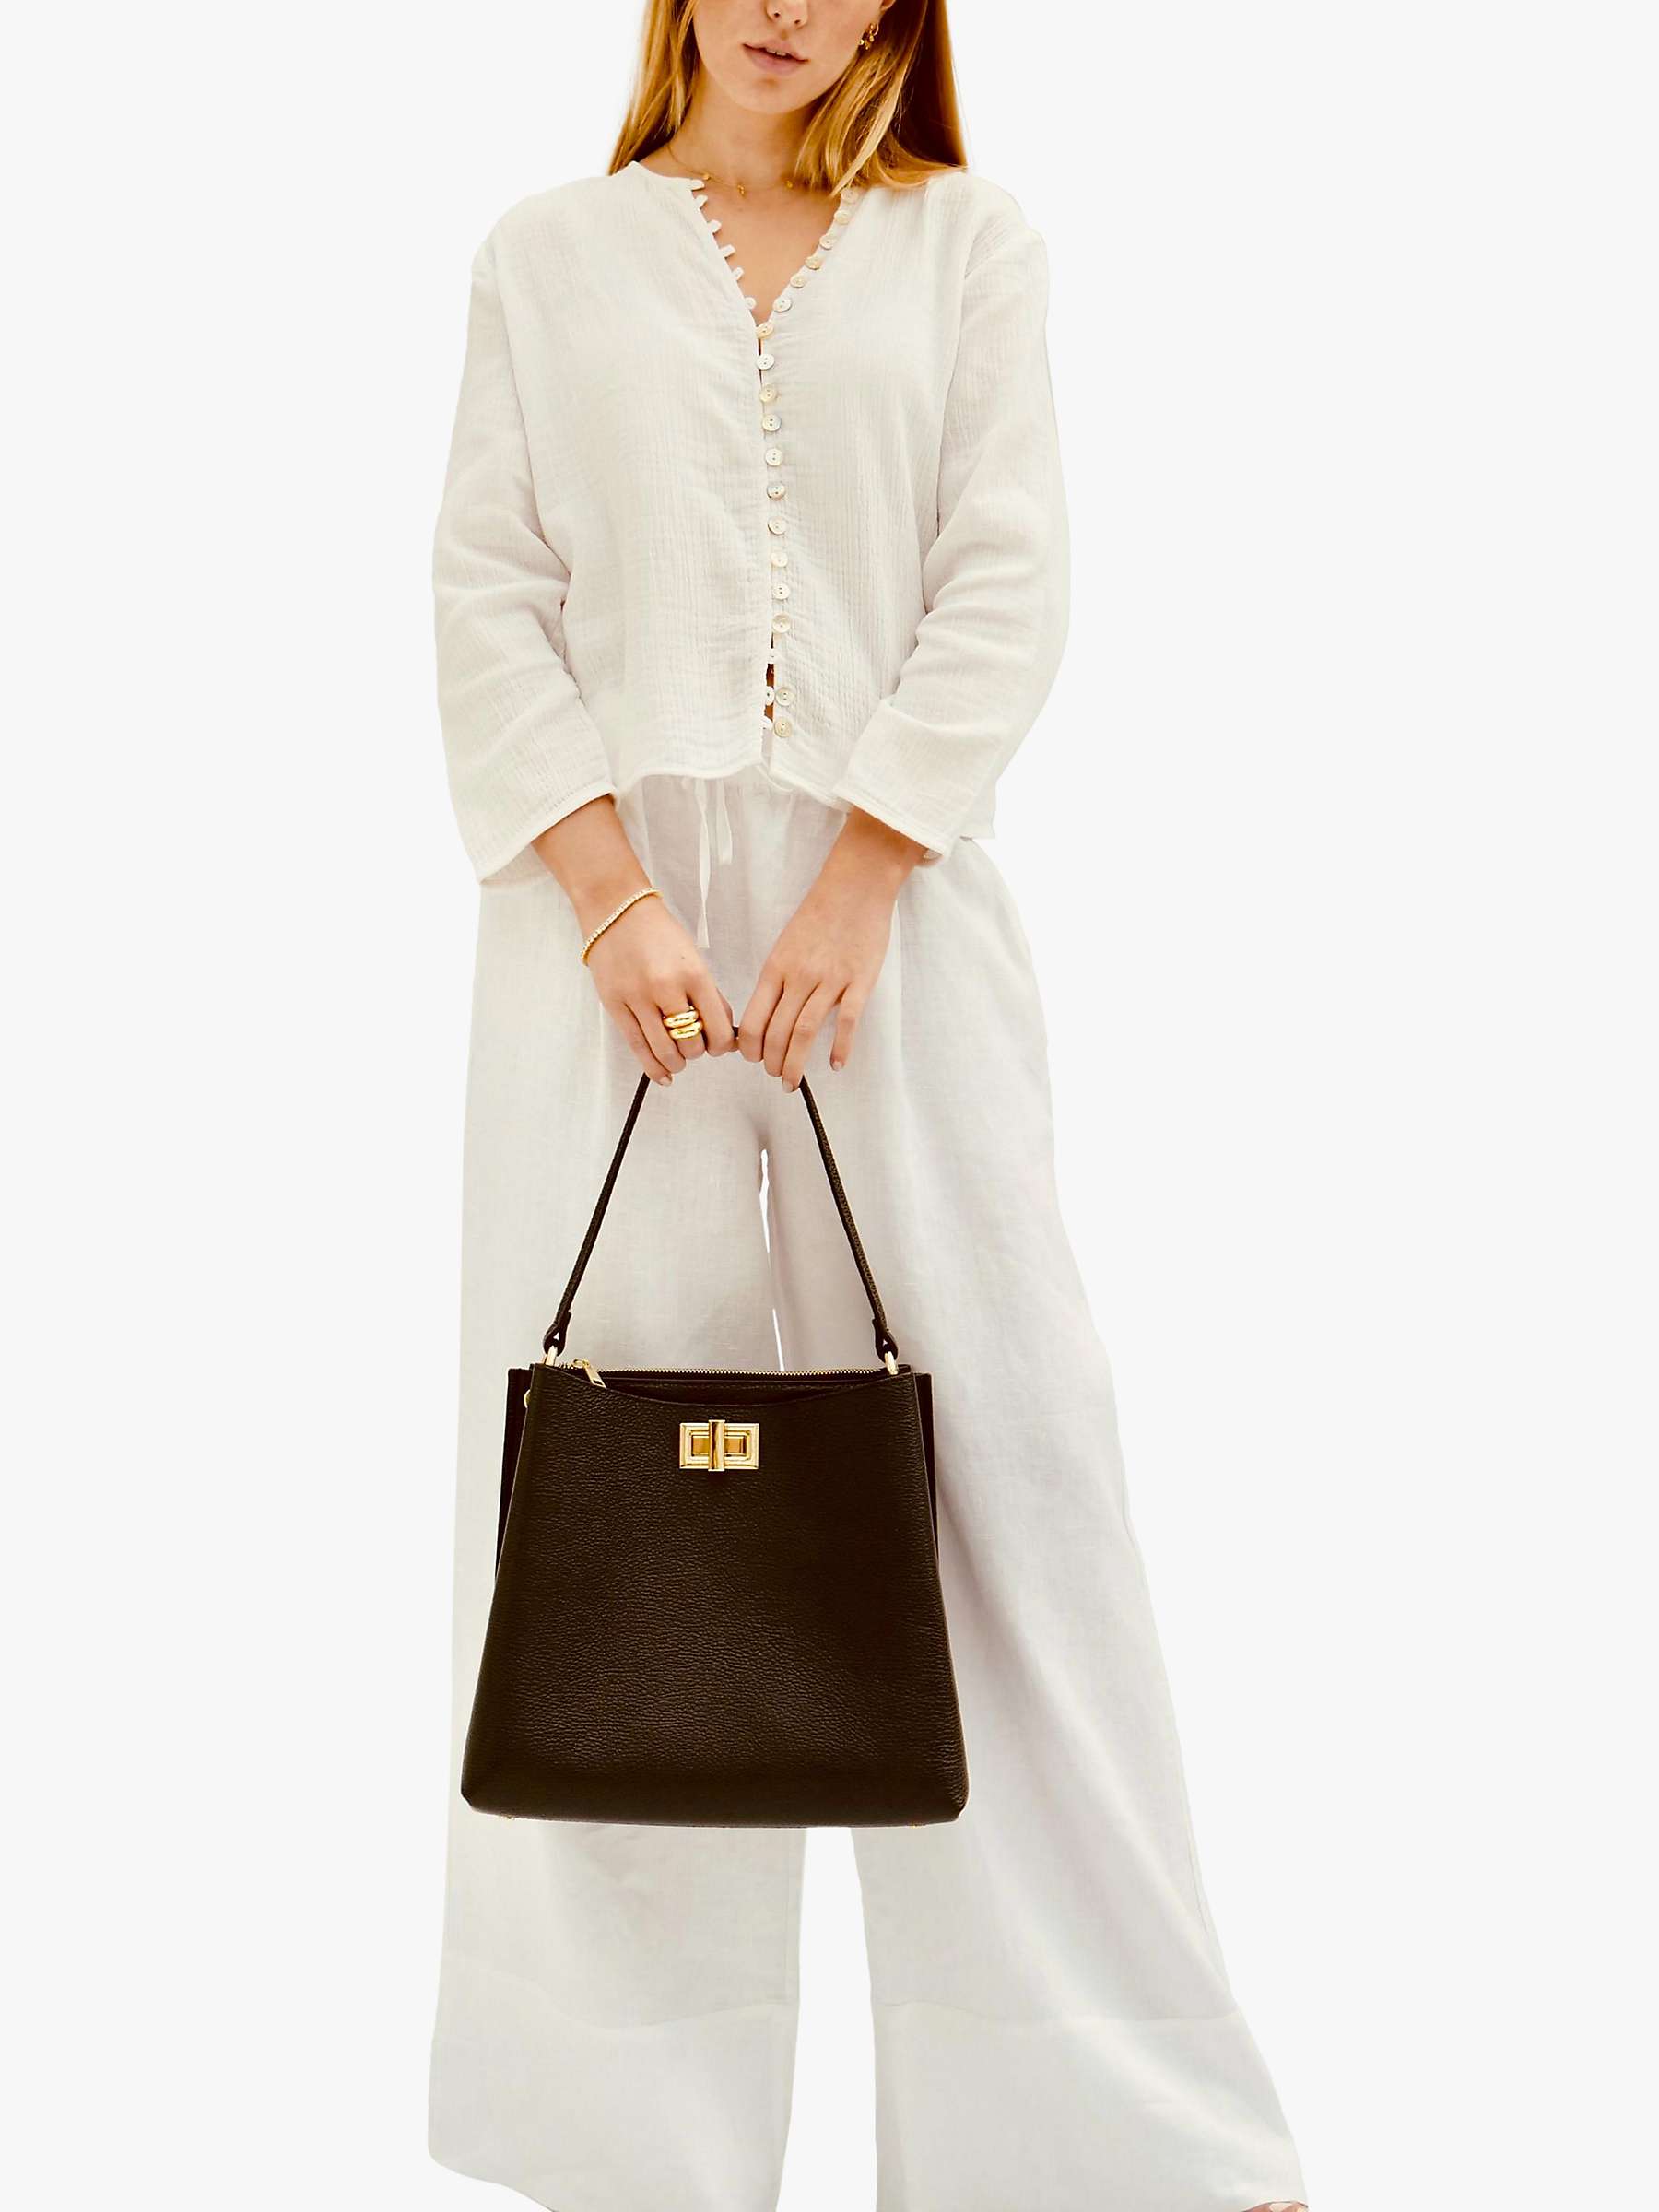 Buy Apatchy Leather Tote Bag Online at johnlewis.com